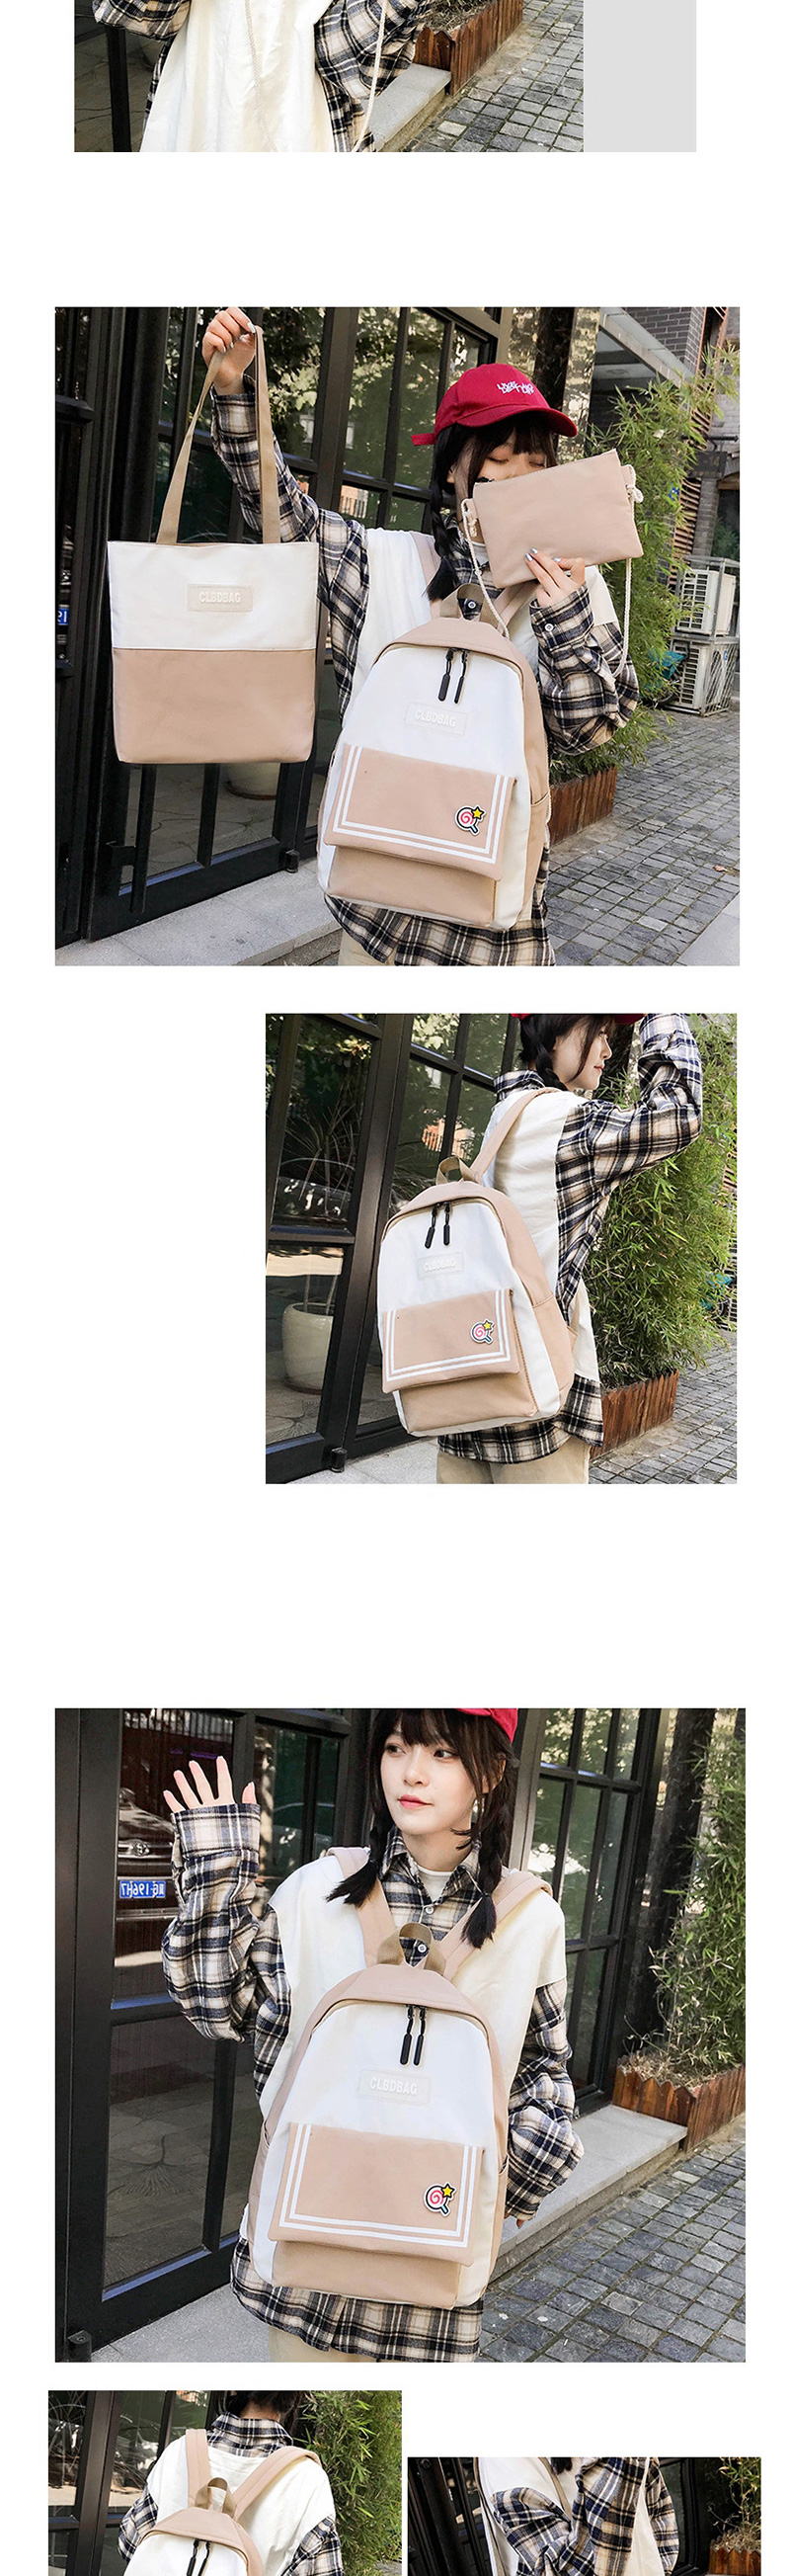 Fashion Khaki Three-piece Backpack With Stitched Contrast Stripes,Backpack